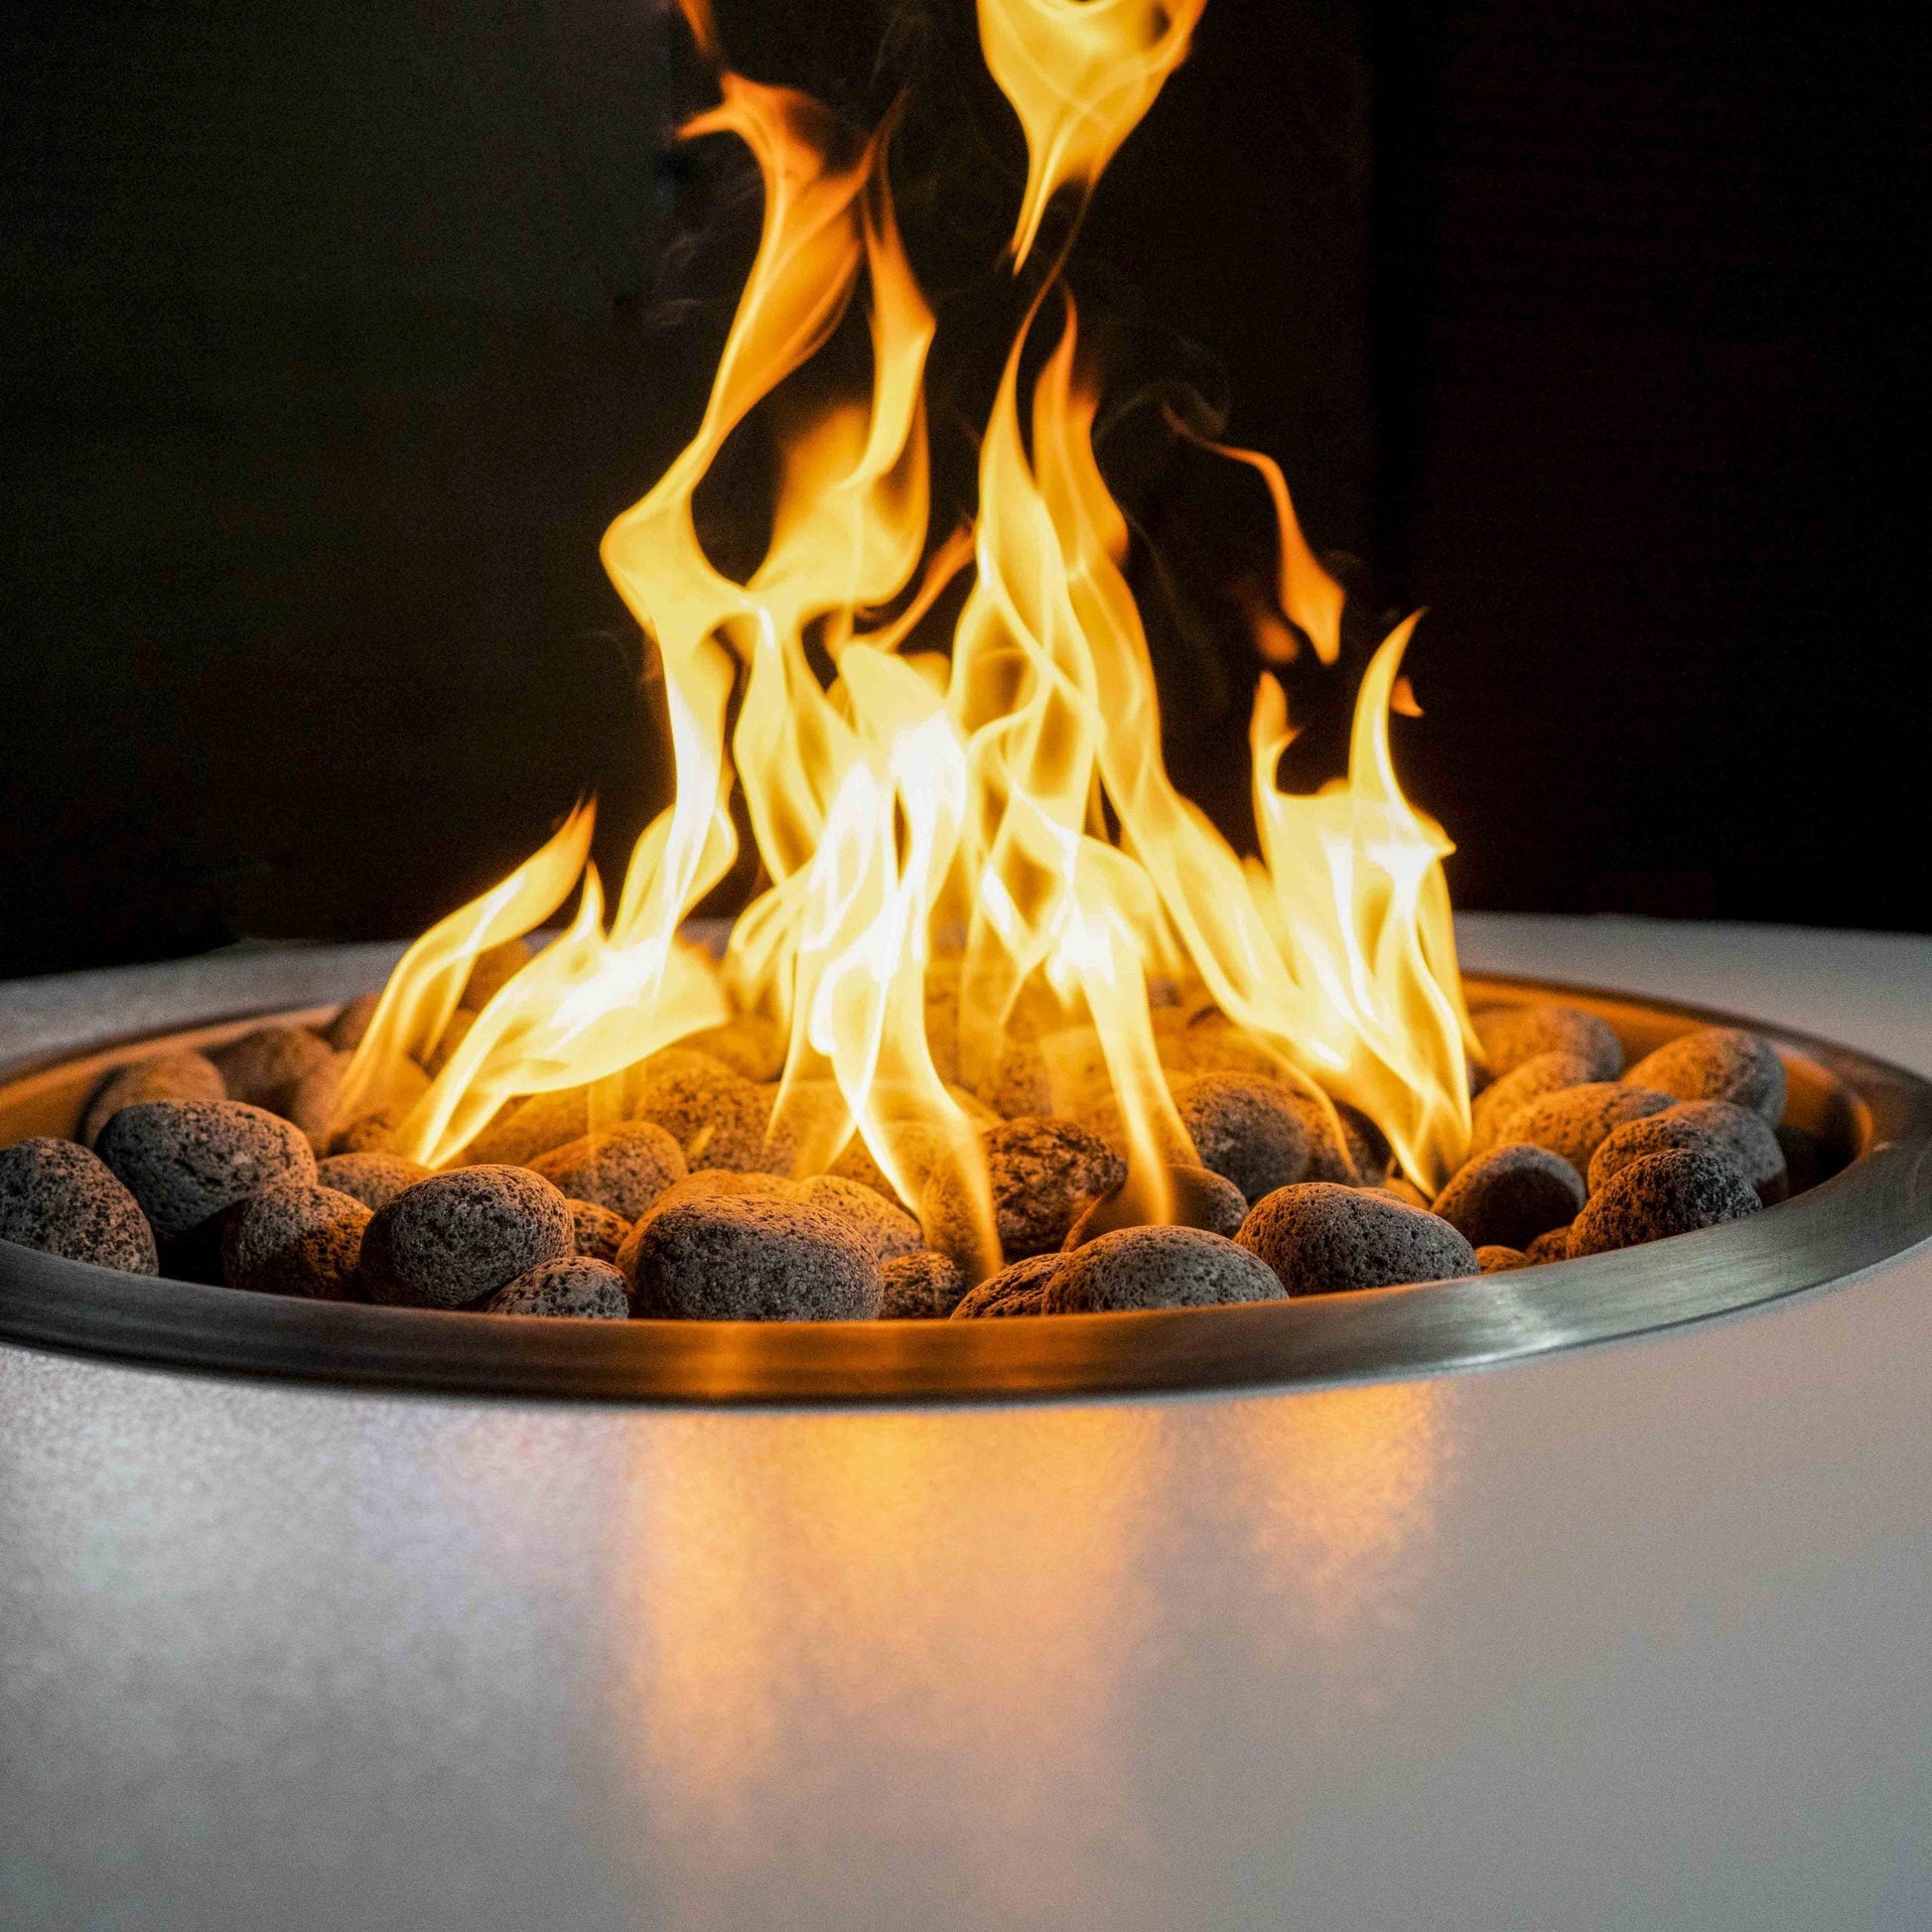 The Outdoor Plus Isla 42" White Powder Coated Metal Natural Gas Fire Pit with Flame Sense with Spark Ignition & Gravity Lounge Chair